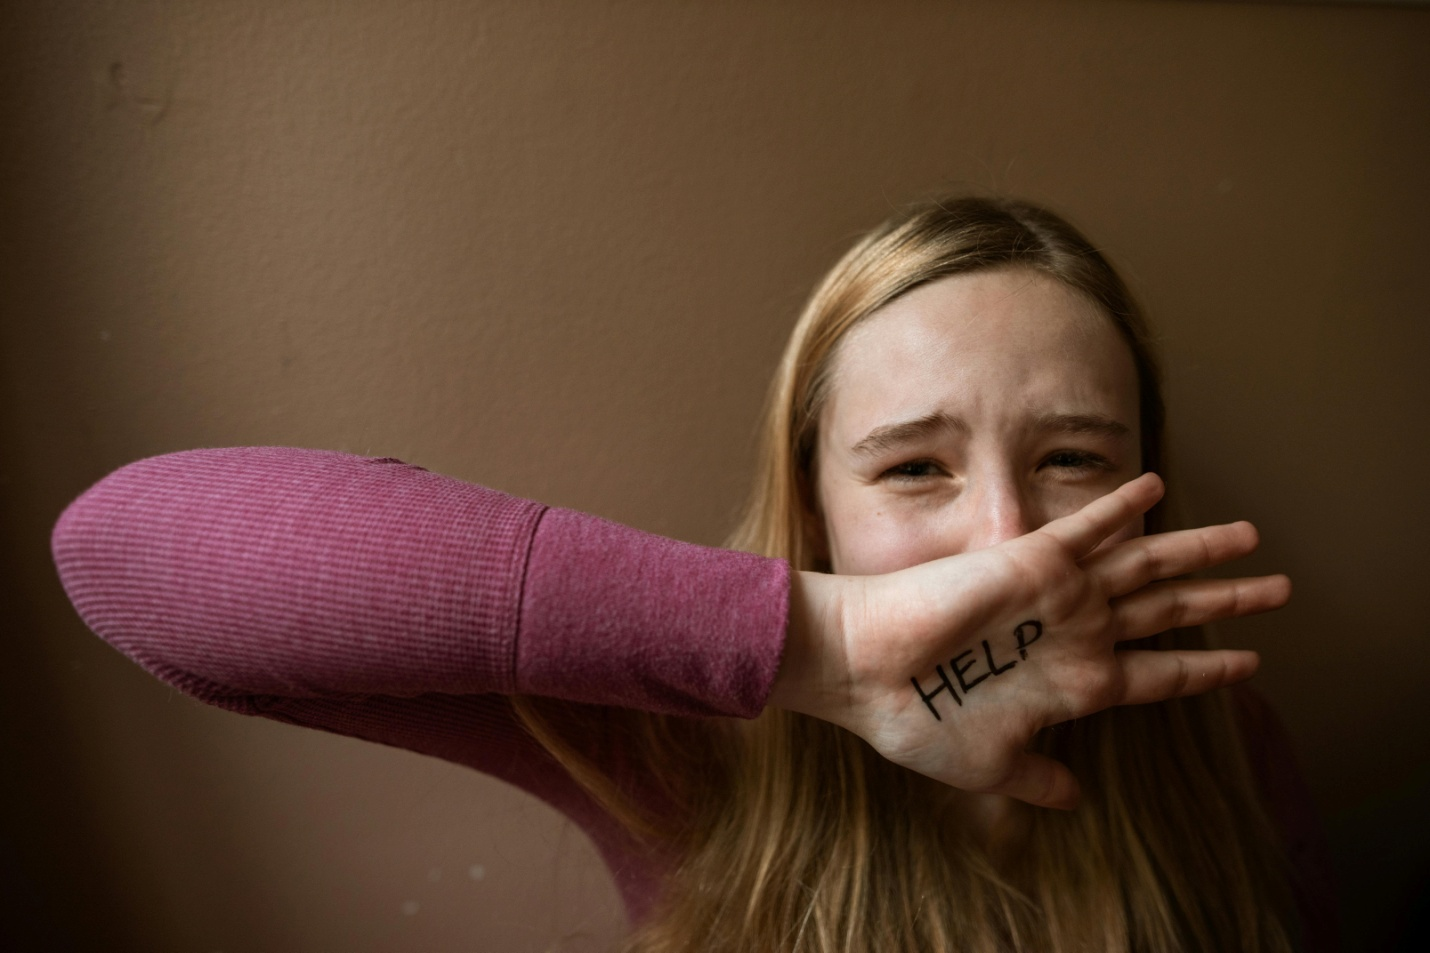 The word 'help' written on a distressed woman's hand